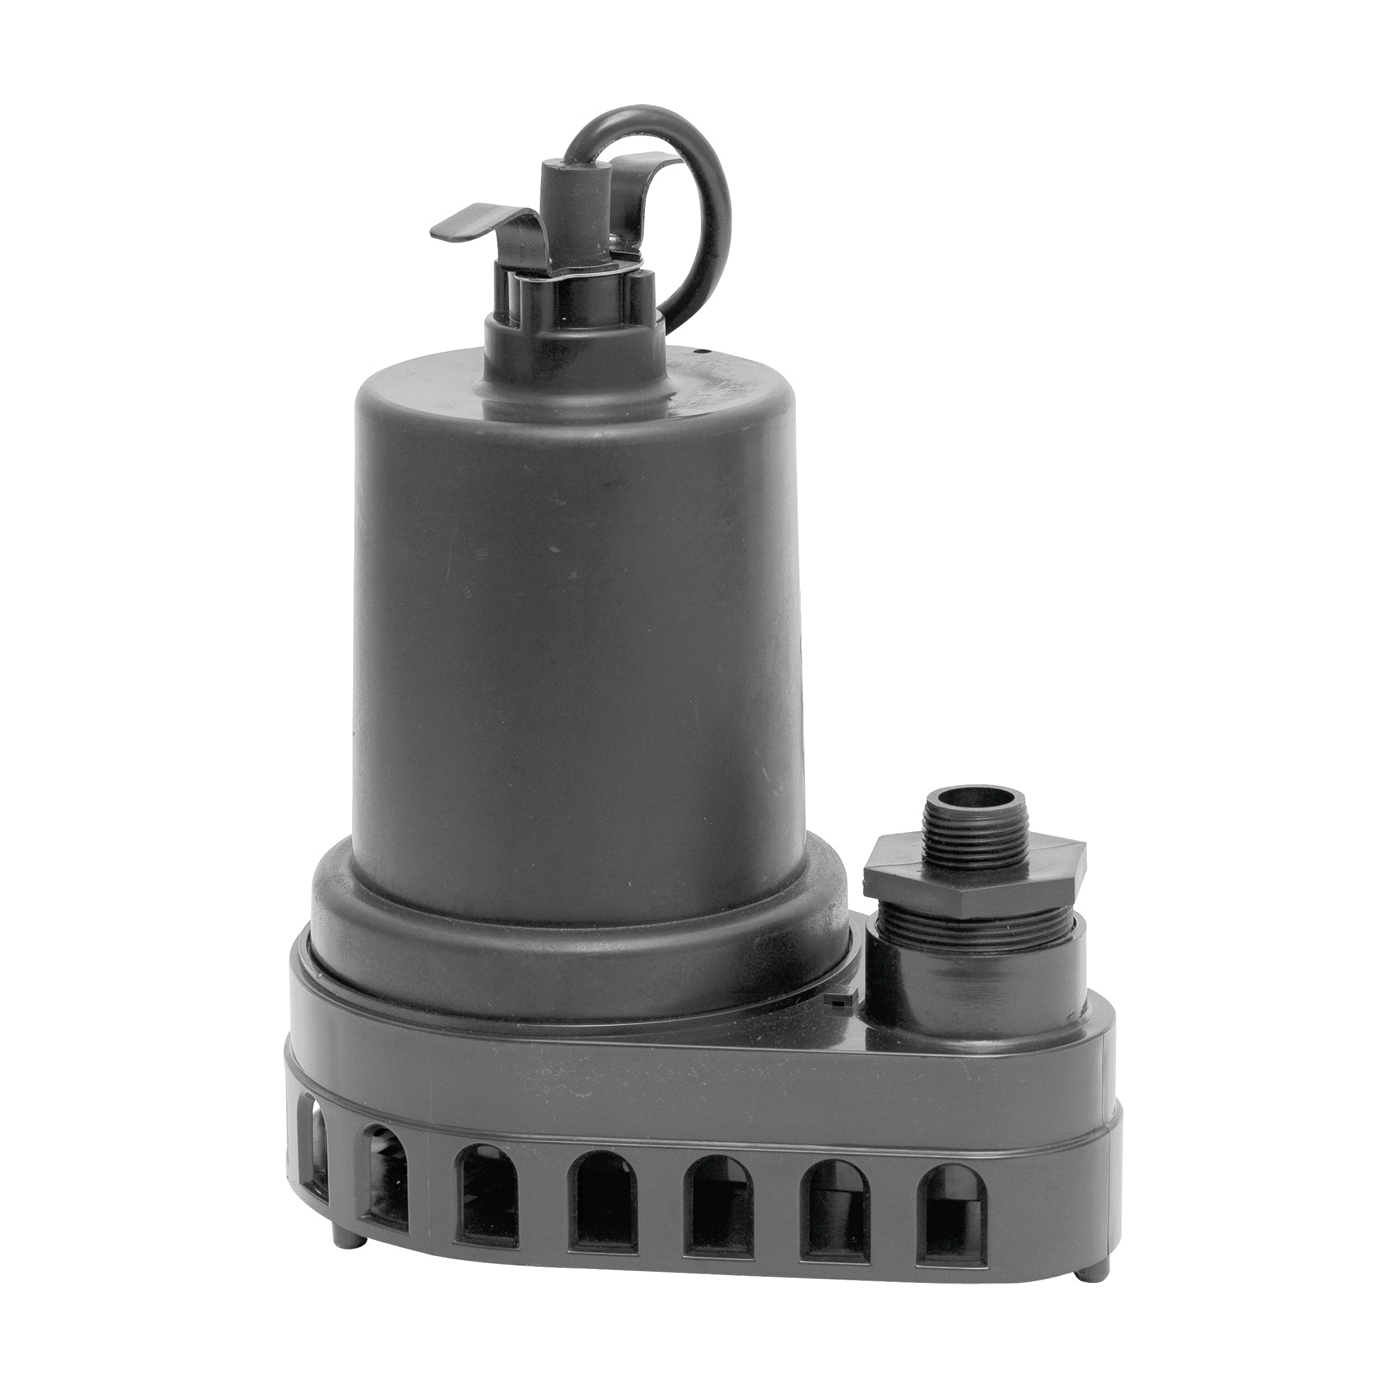 91570 Submersible Utility Pump, 4.9 A, 120 V, 0.5 hp, 1-1/2 in Outlet, 55 gpm, Thermoplastic Impeller